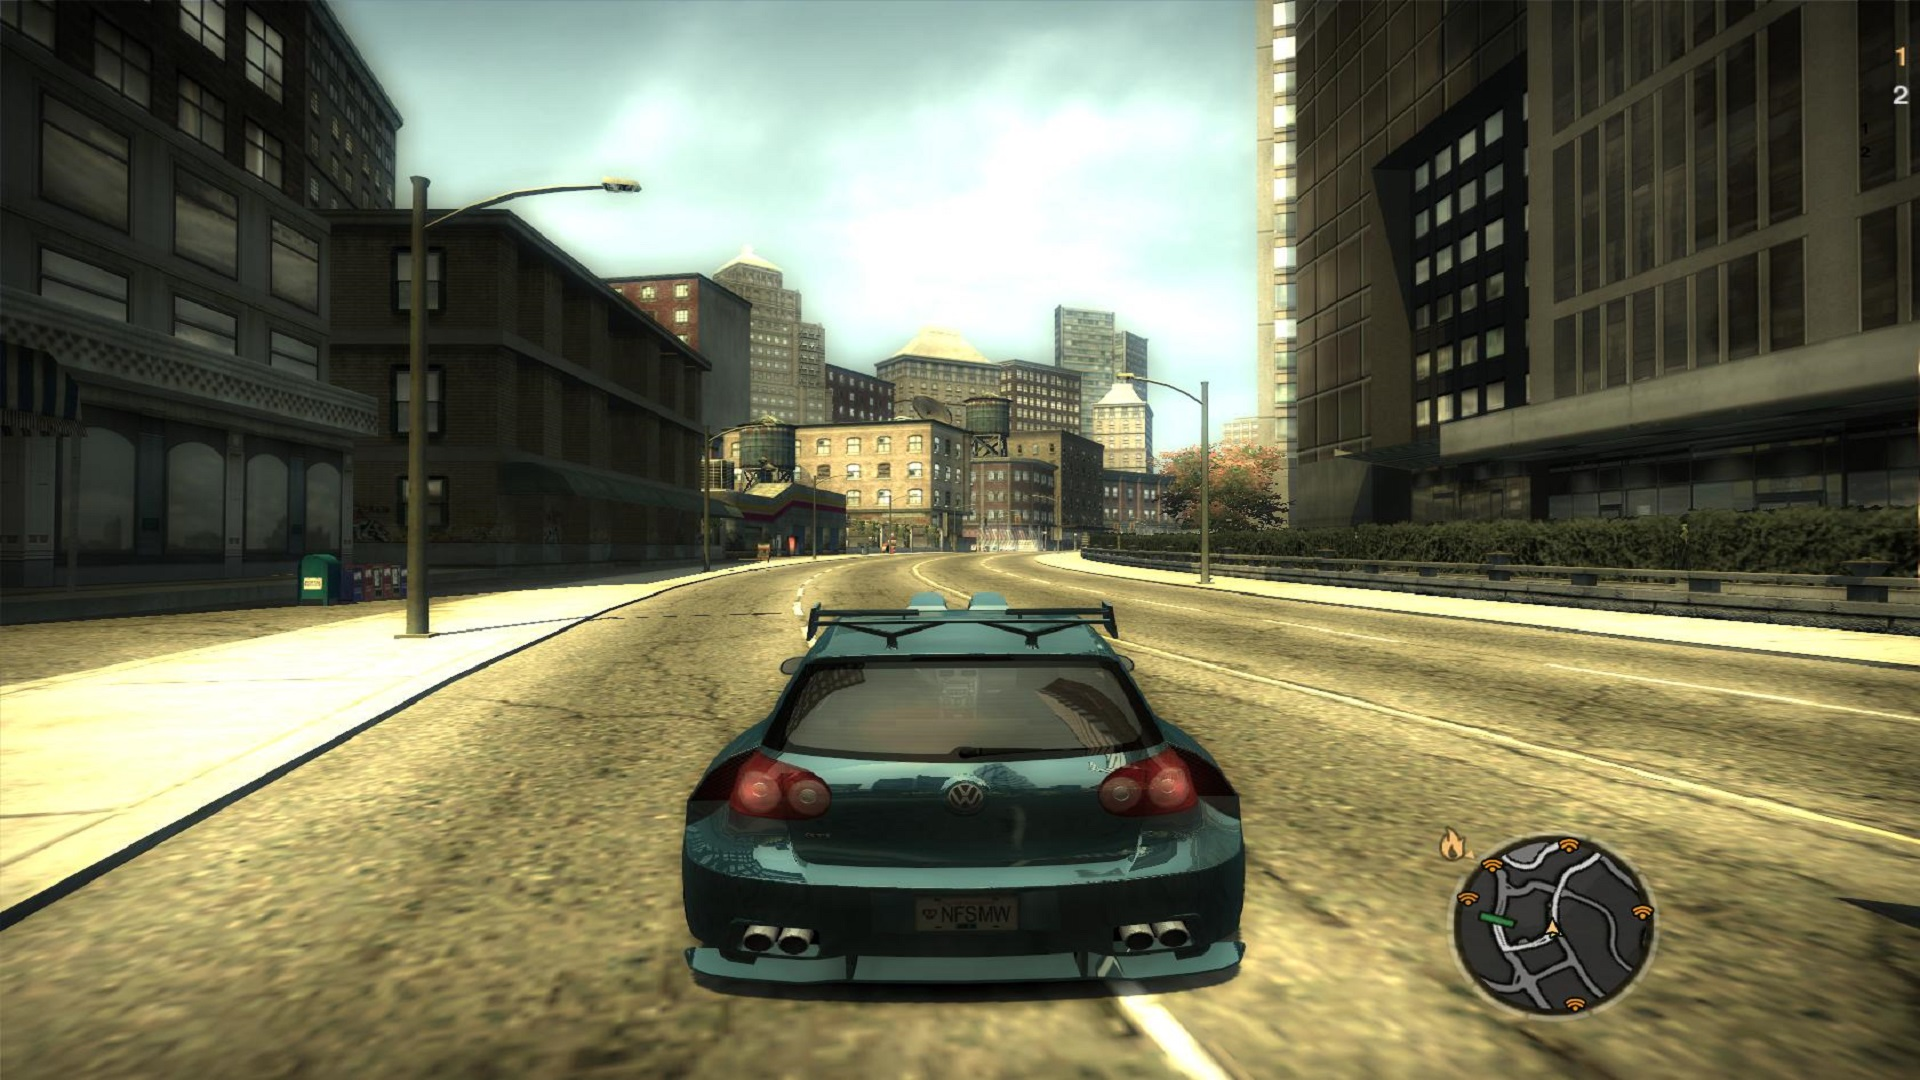 Most wanted на пк без торрента. NFS most wanted 2005 геймплей. Most Water 2005. Гонки NFS most wanted 2005. NFS most wanted 2005 мост.